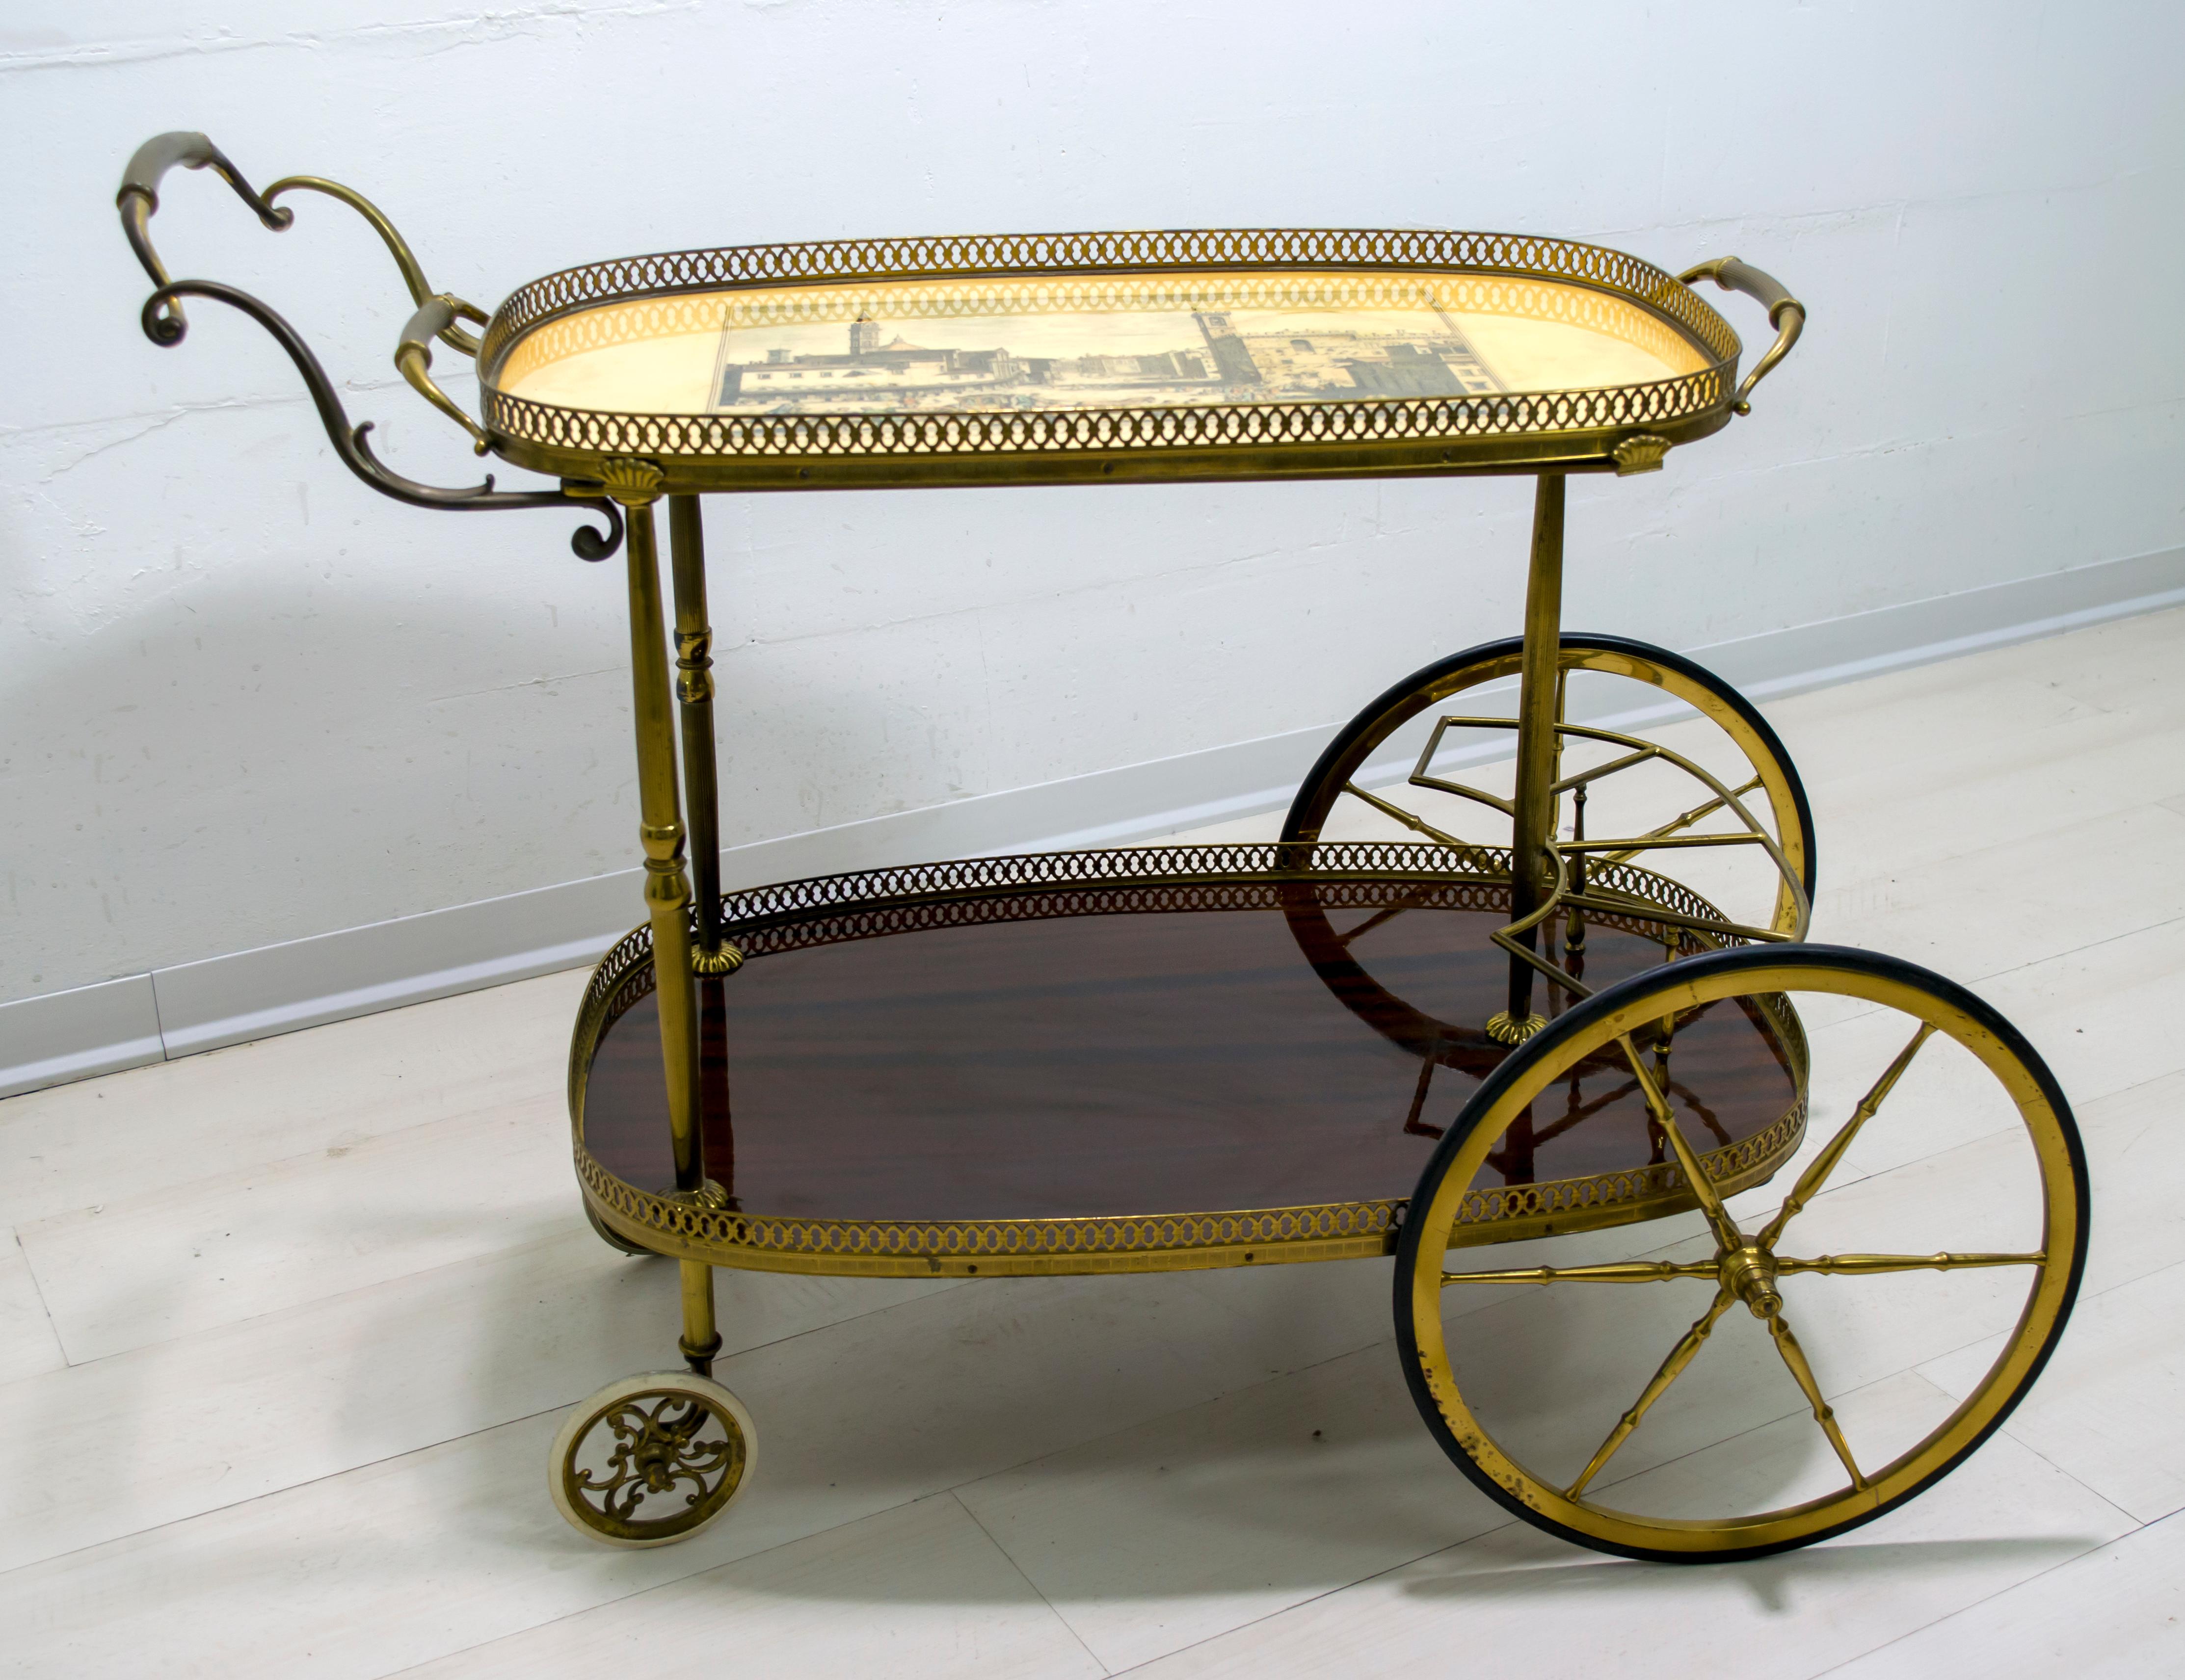 This bar trolley is made of mahogany and brass with a serving tray, an old image of Florence on the tray.

